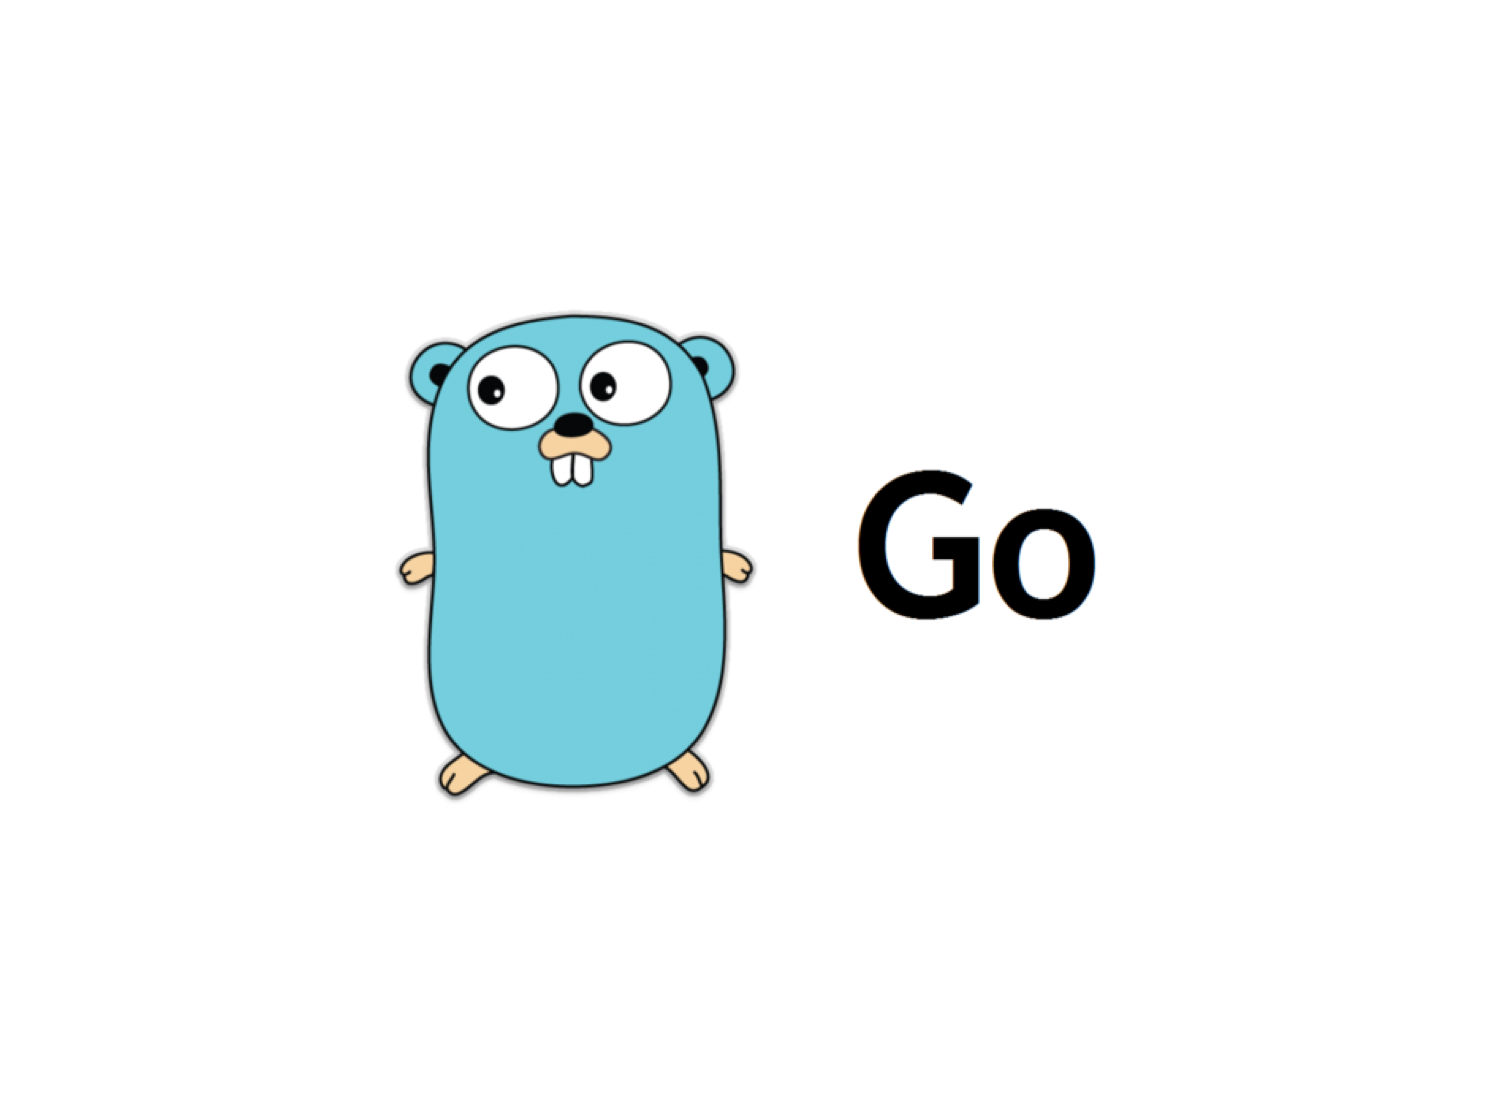 2018-02-12-go-intro/Golang_main.png